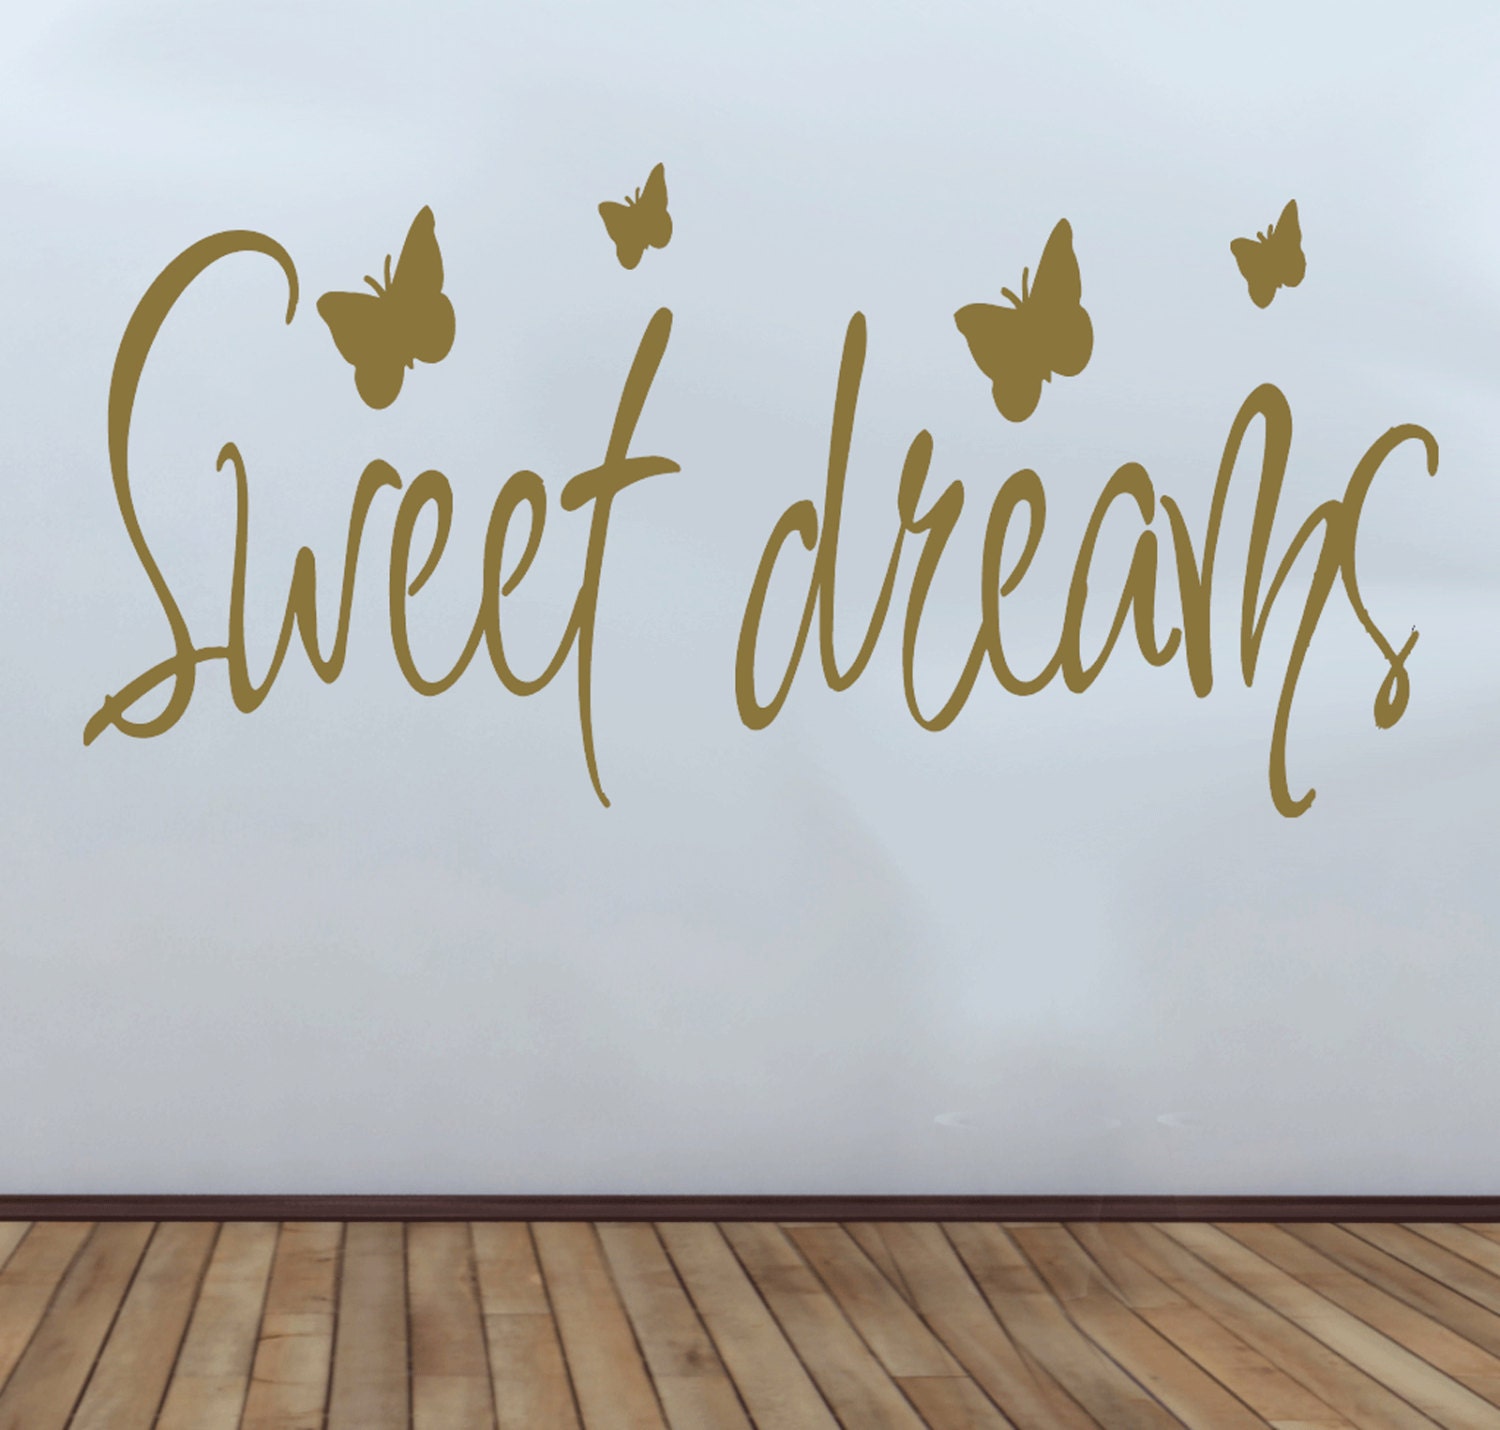 Sweet Dreams And Butterflys Bedroom Quote Wall Art Vinyl Decal Sticker